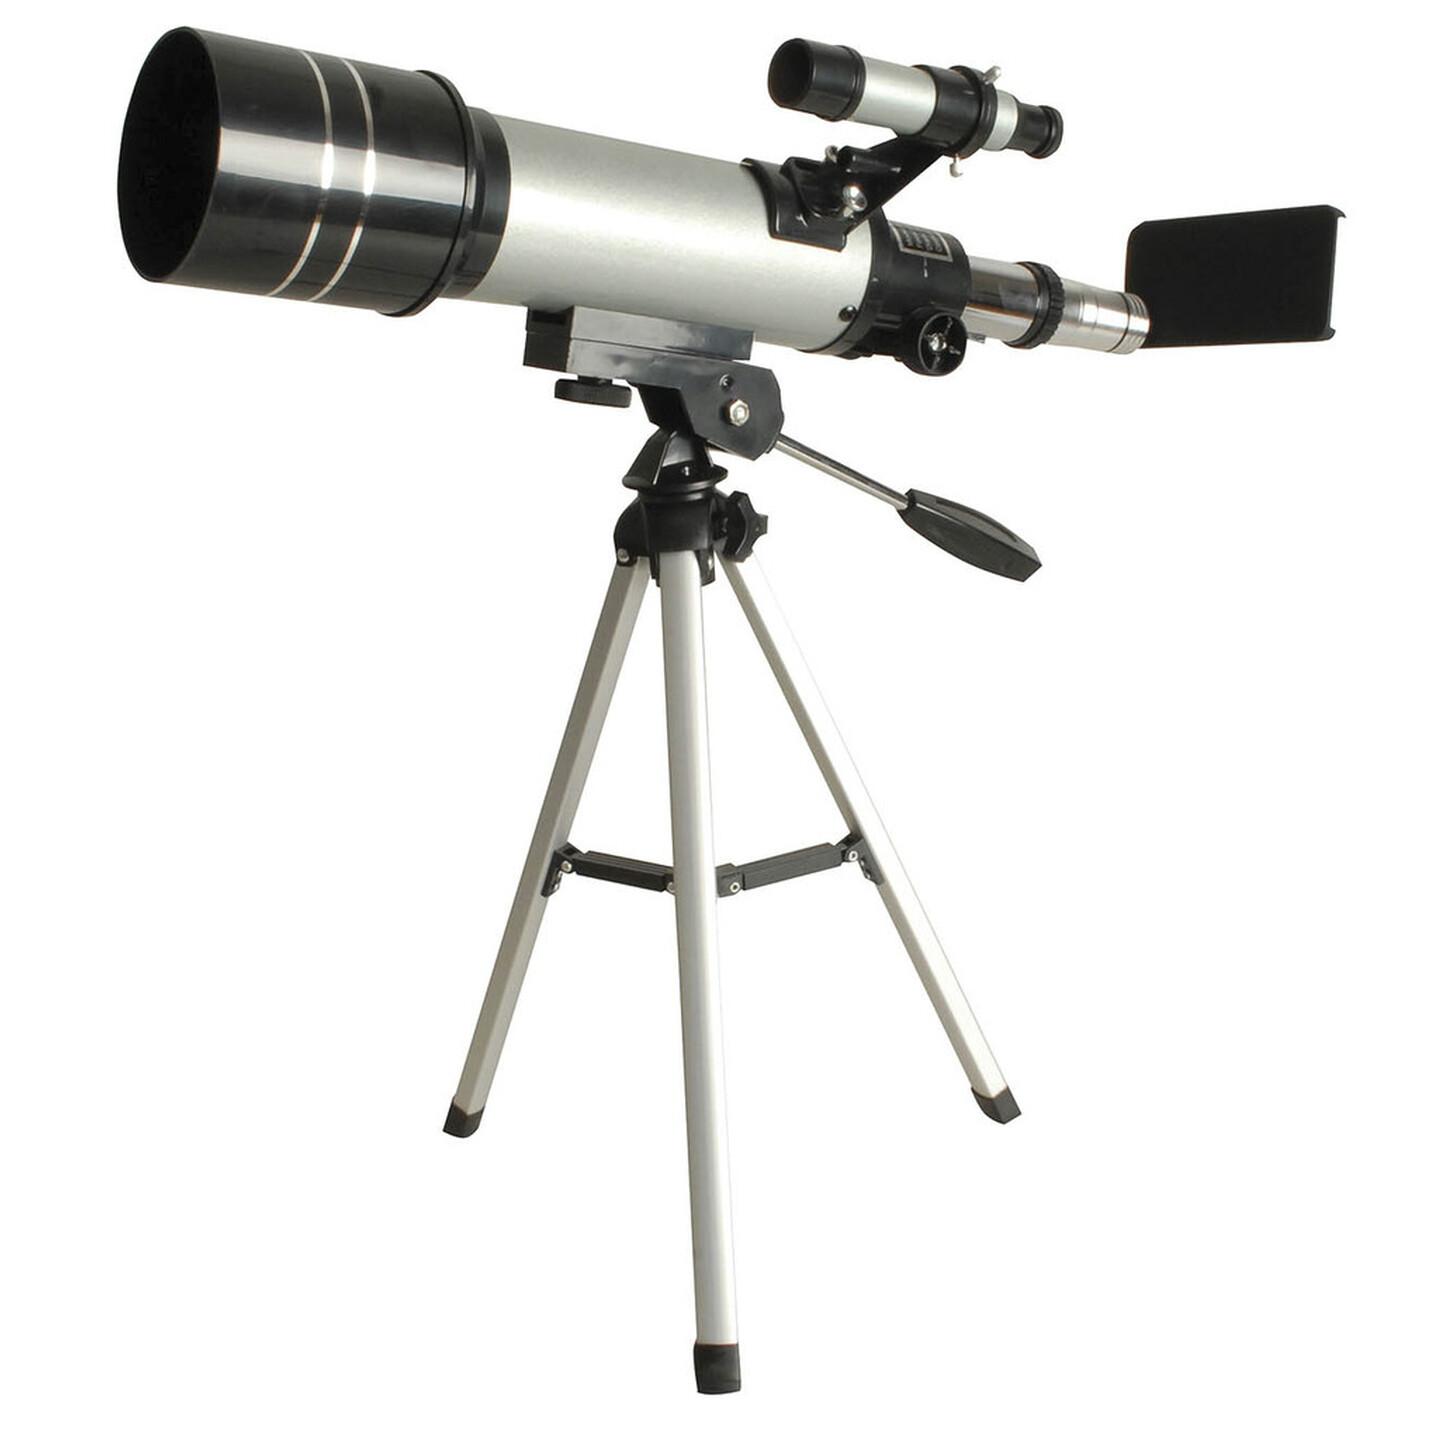 50X Spotting Scope with Smartphone Viewing Attachment